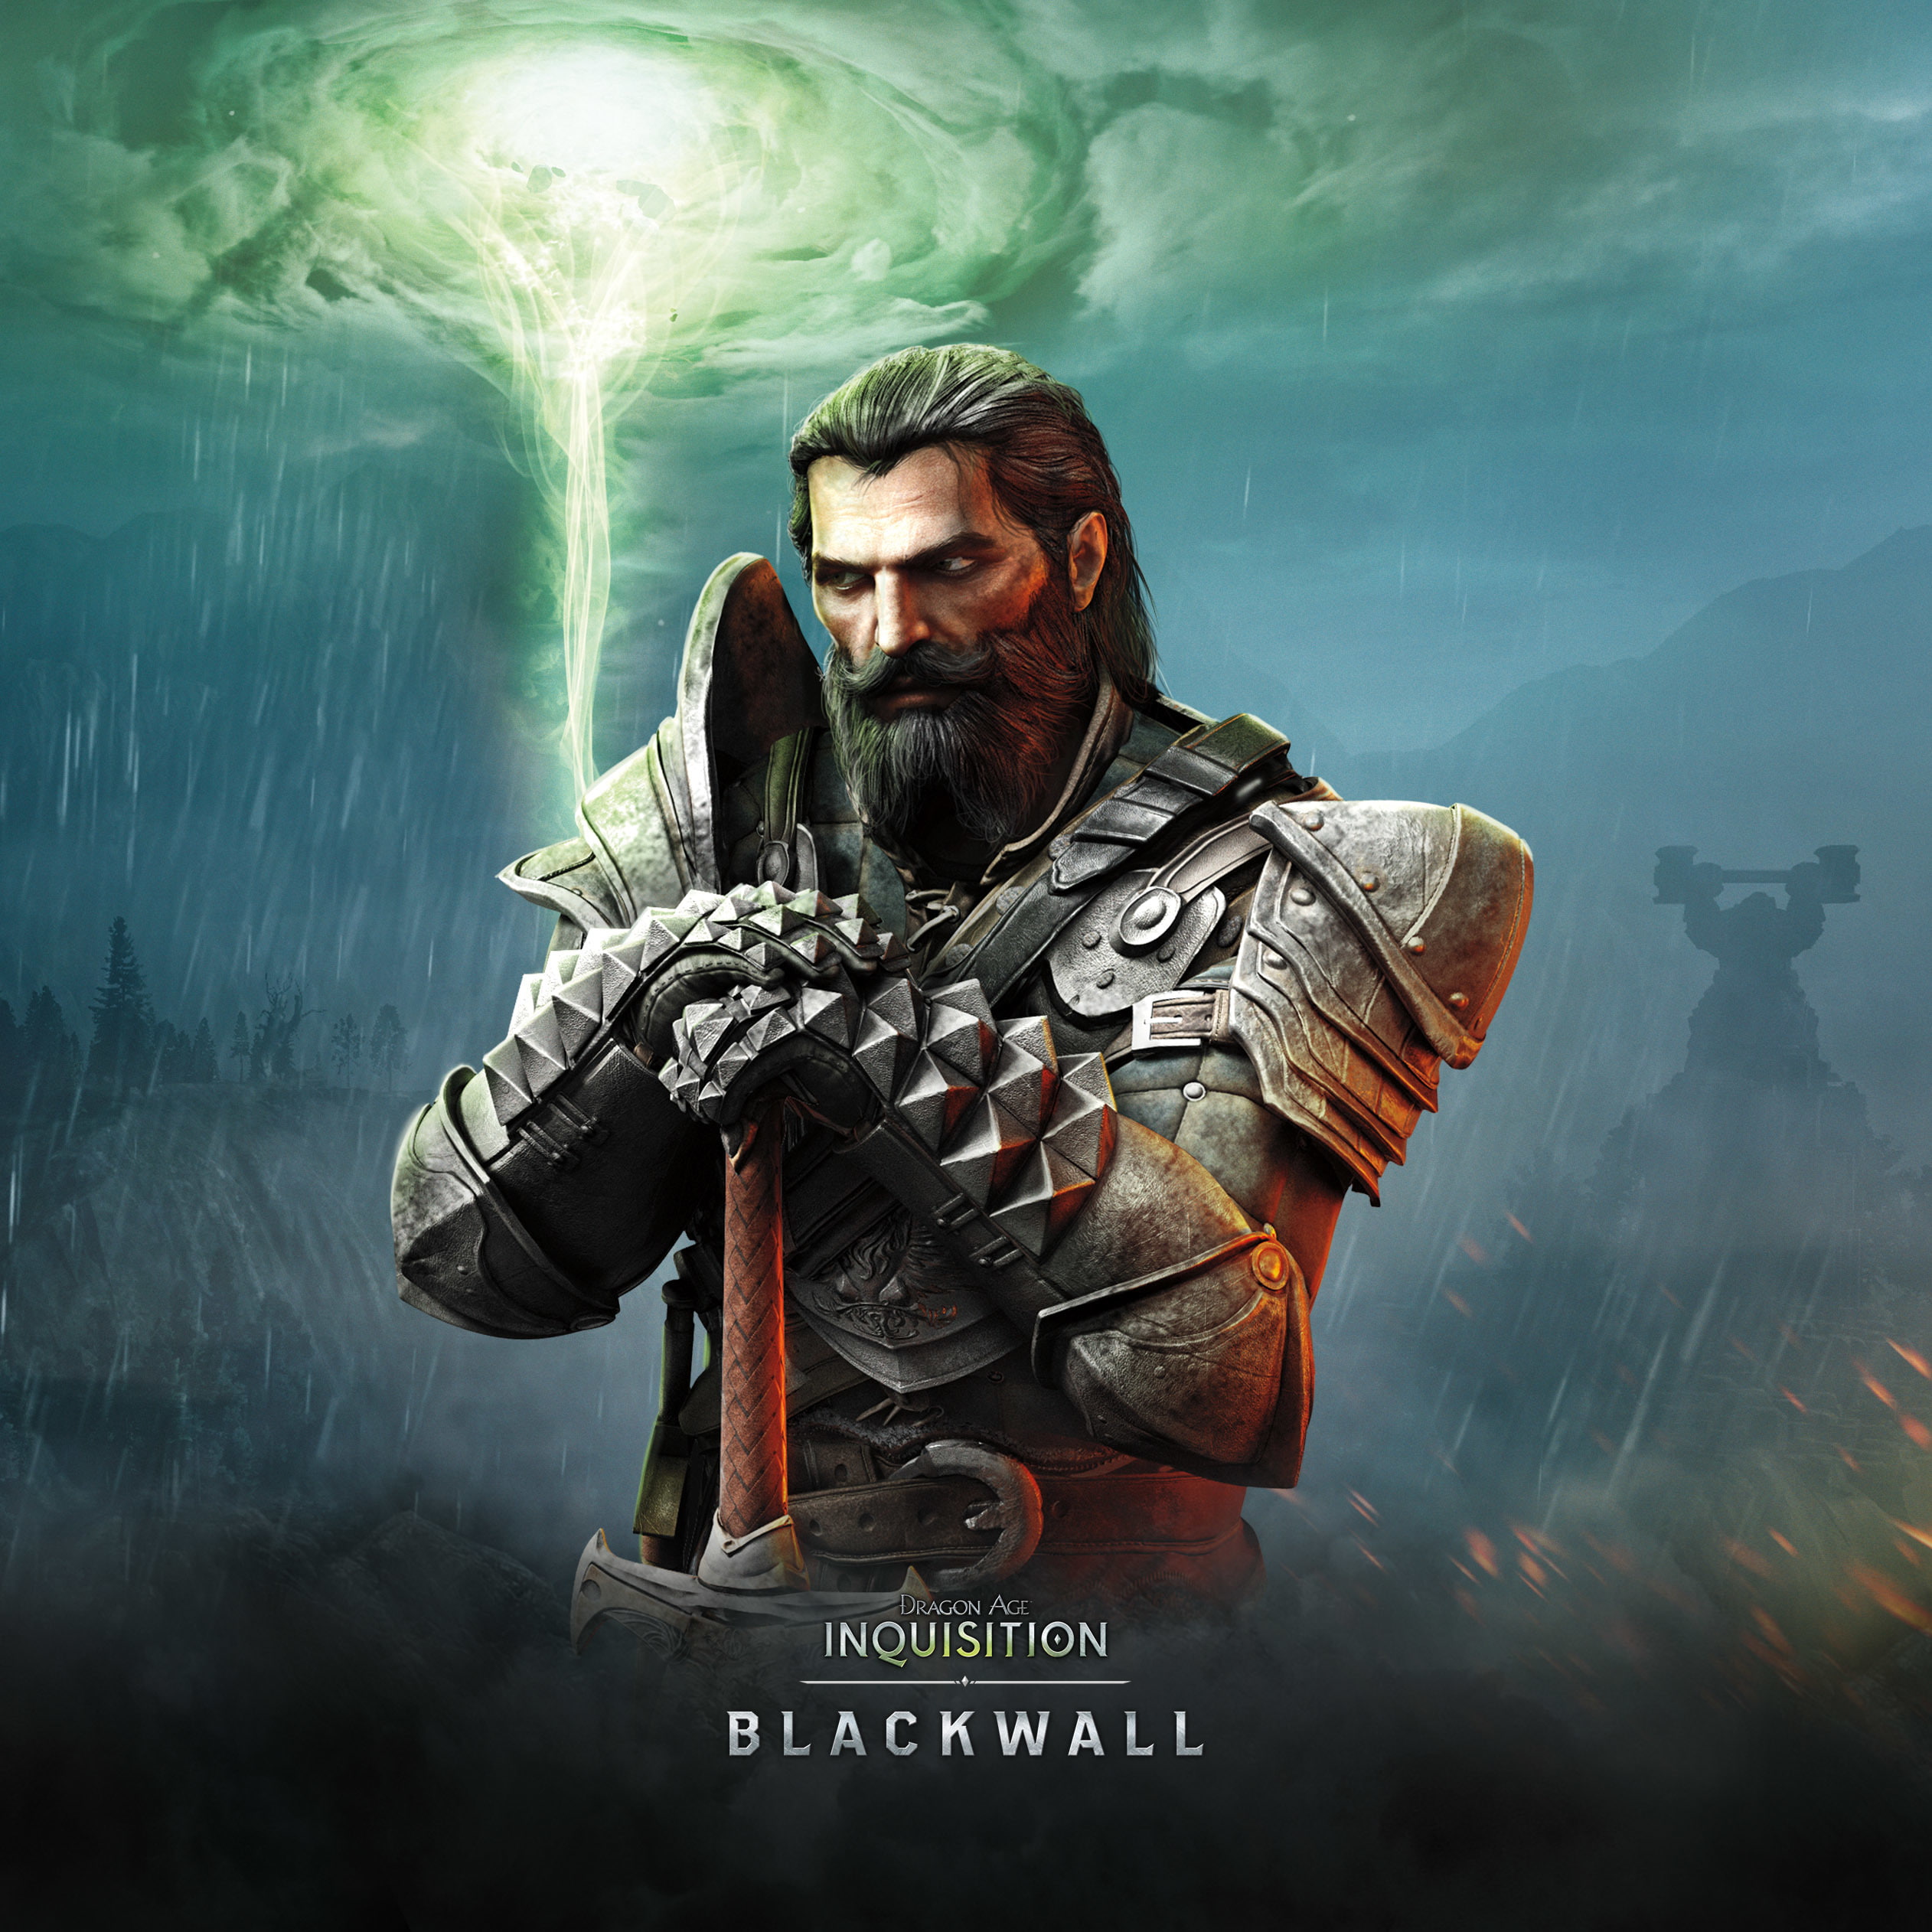 Inquisition Blackwall wallpaper, Dragon Age Inquisition, ally